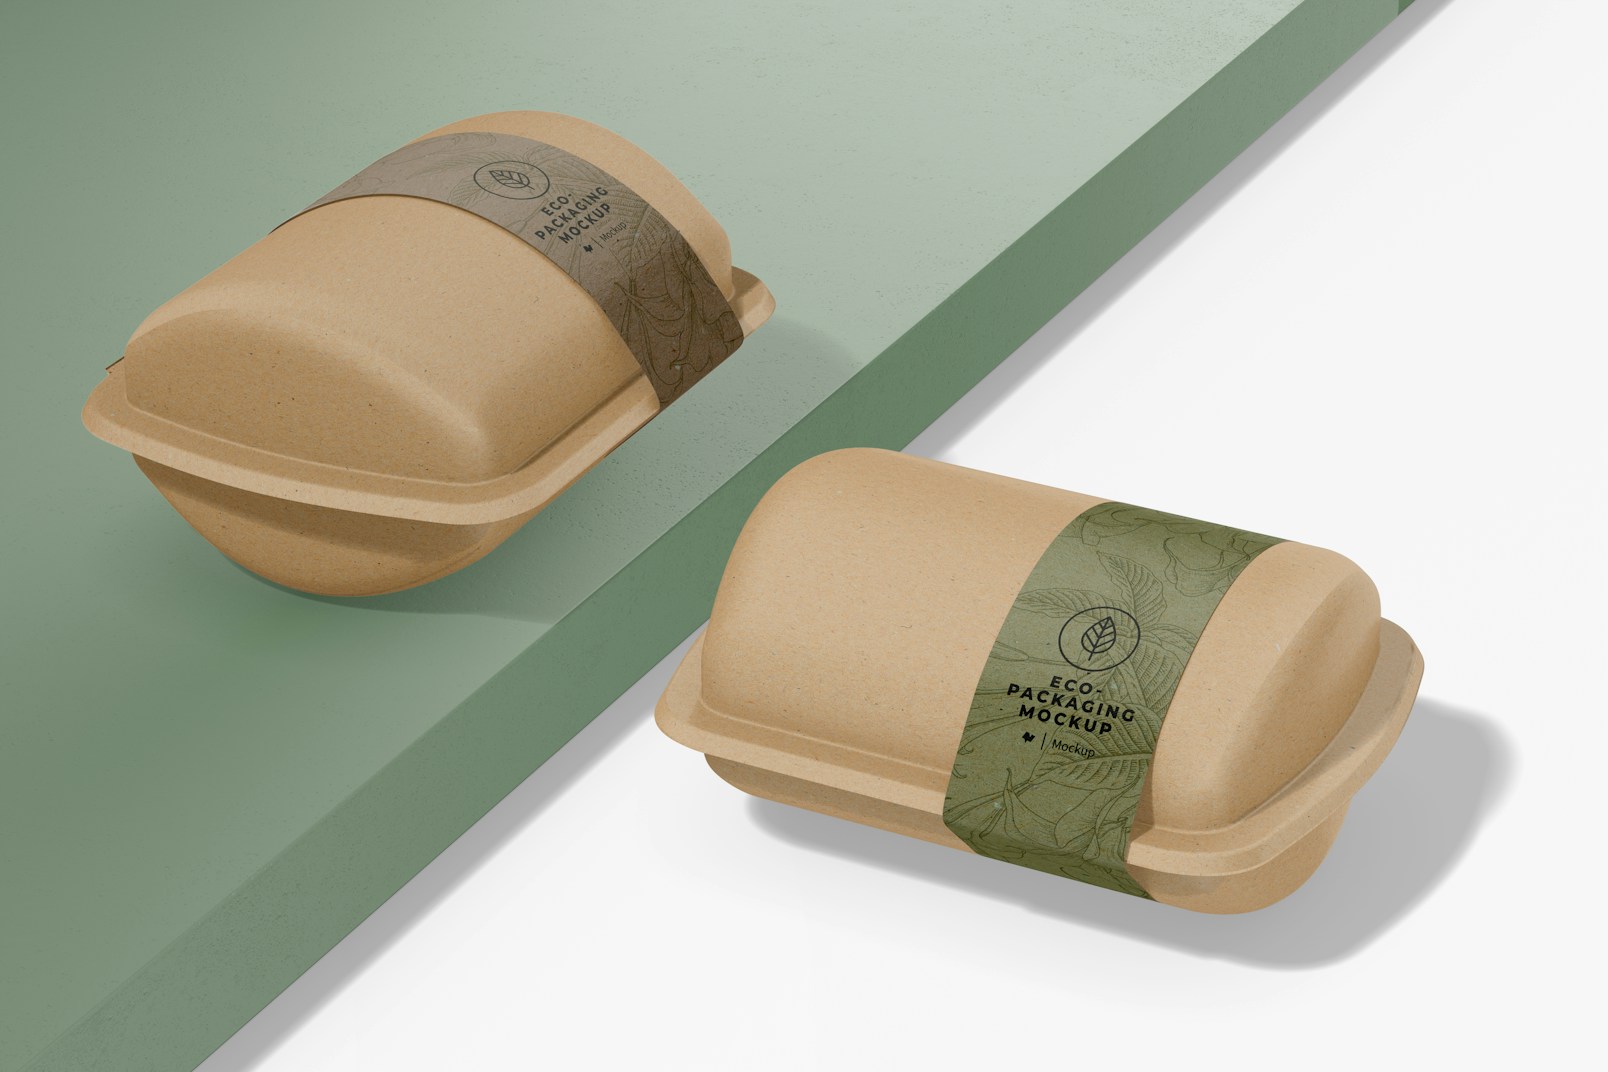 Small Biodegradable Food Packaging Mockup, Right View